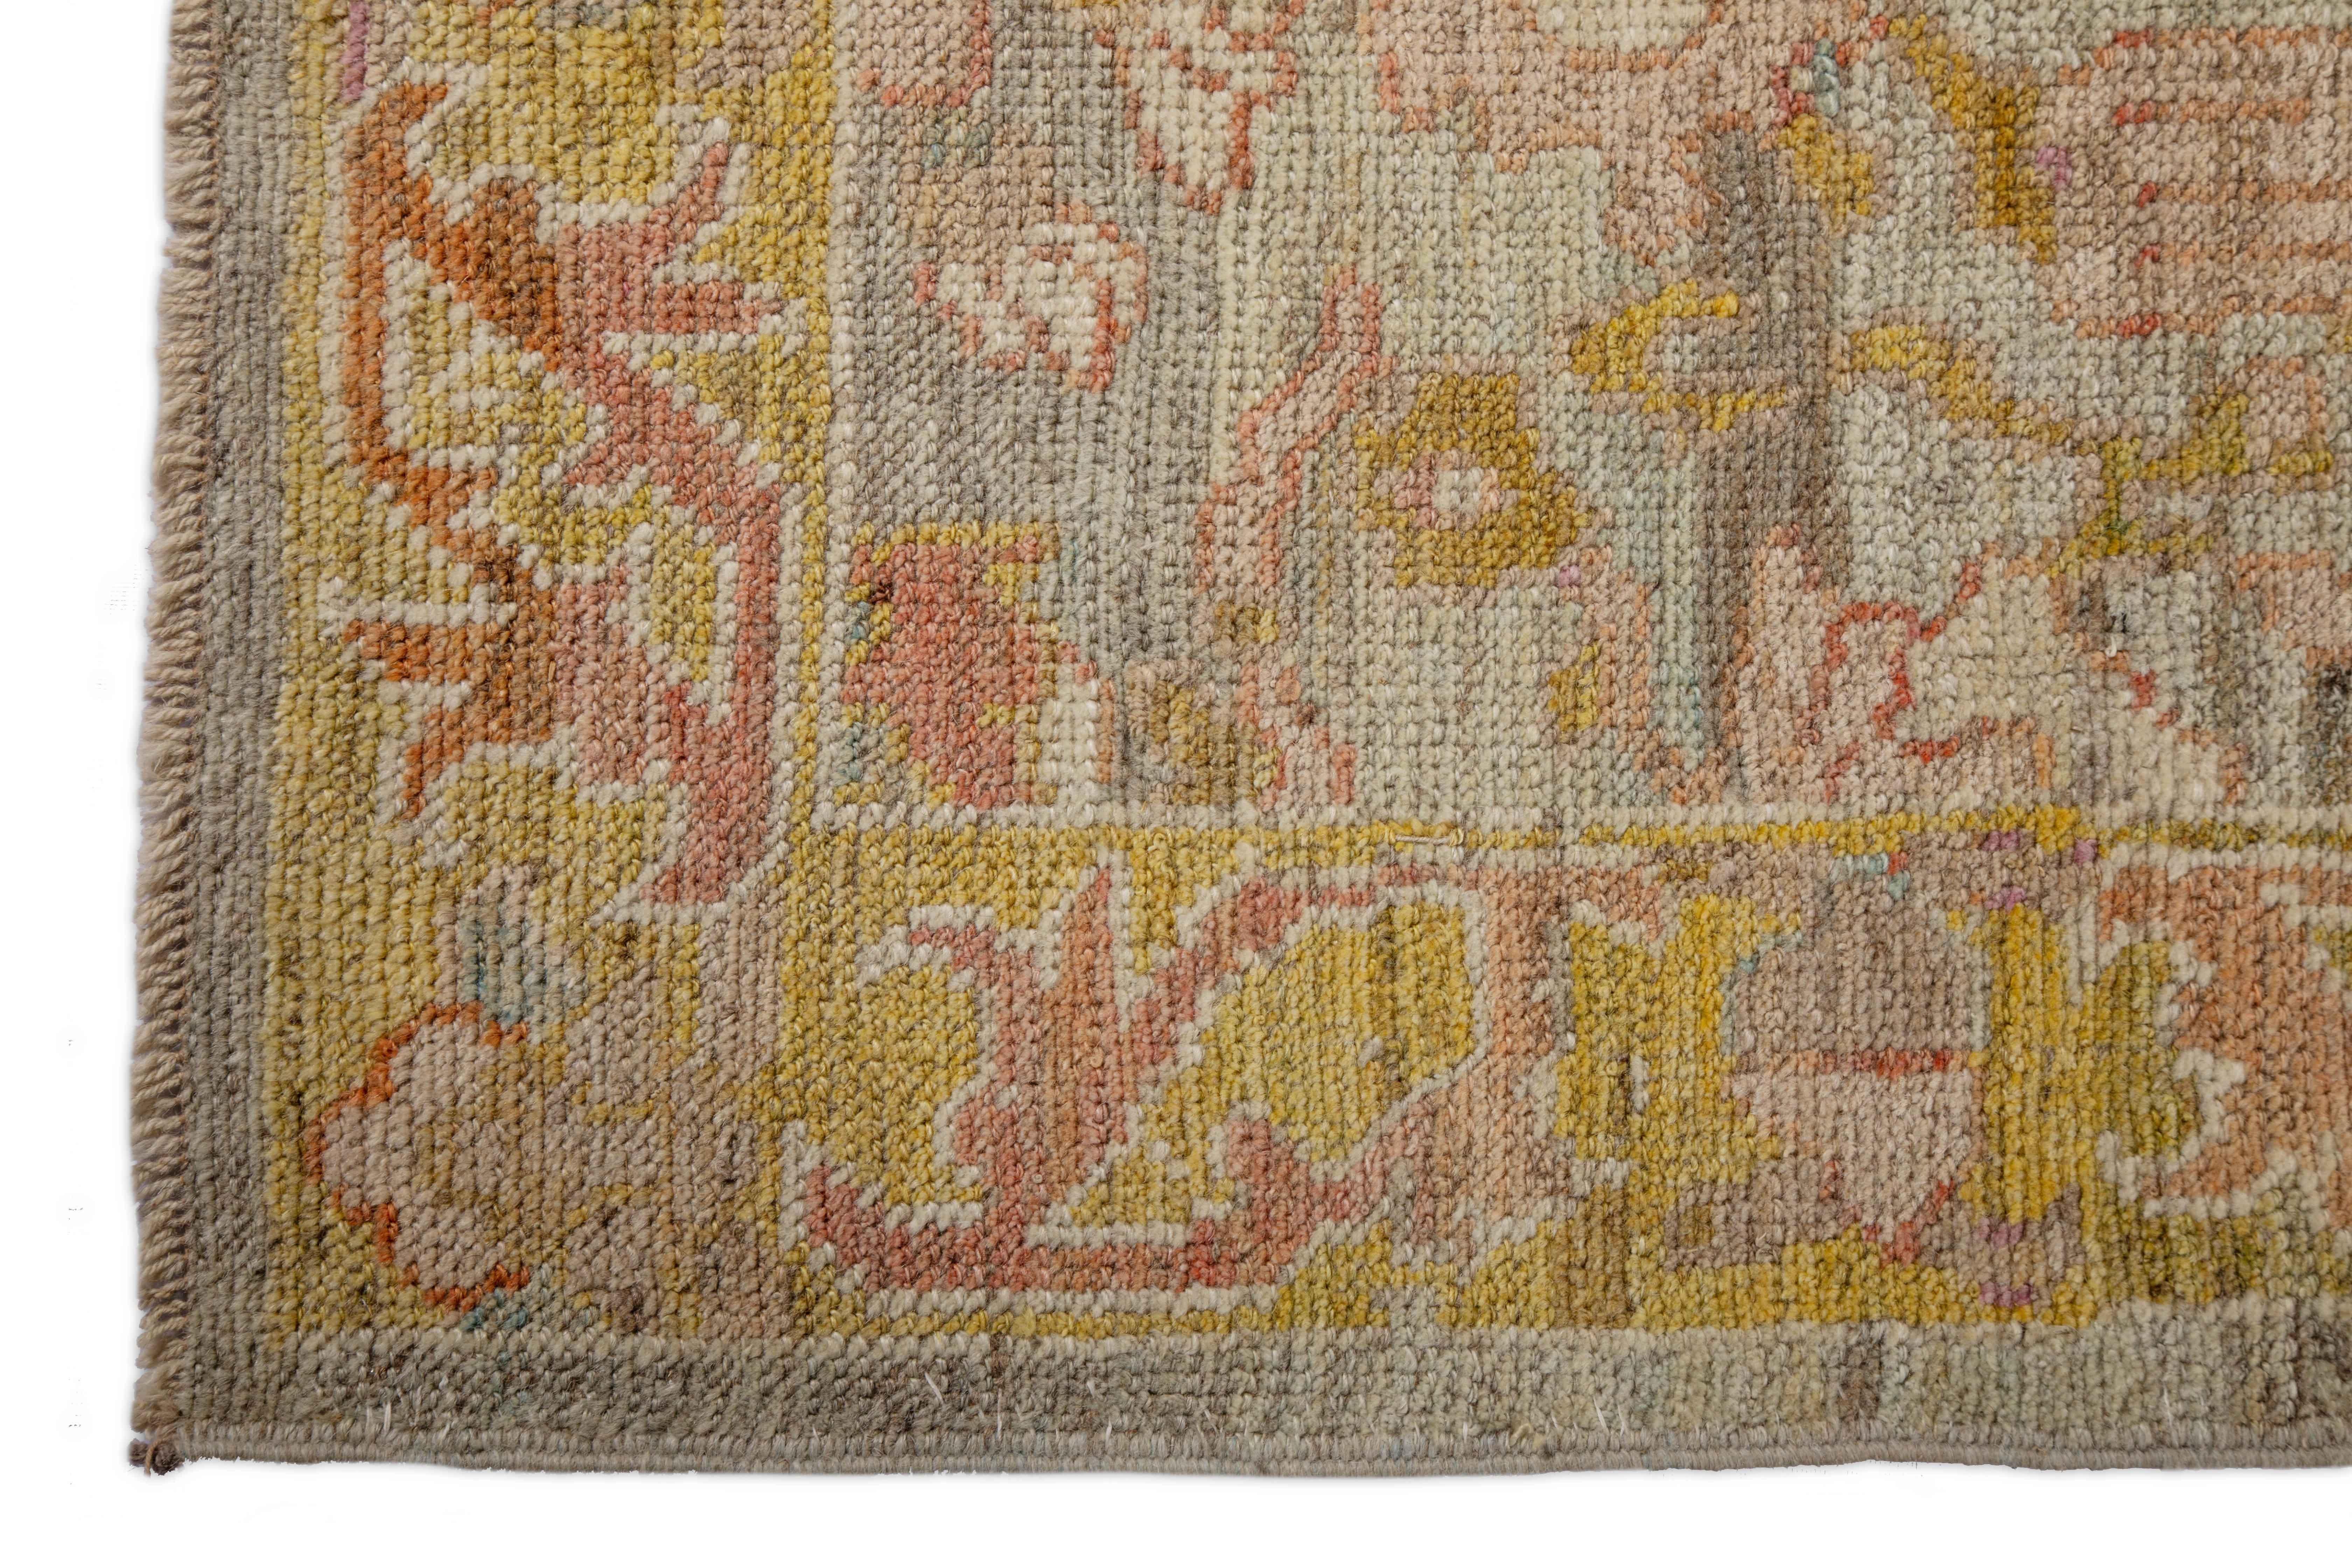 Turkish Contemporary Oushak Runner Rug from Turkey with Gold and Pink Floral Patterns